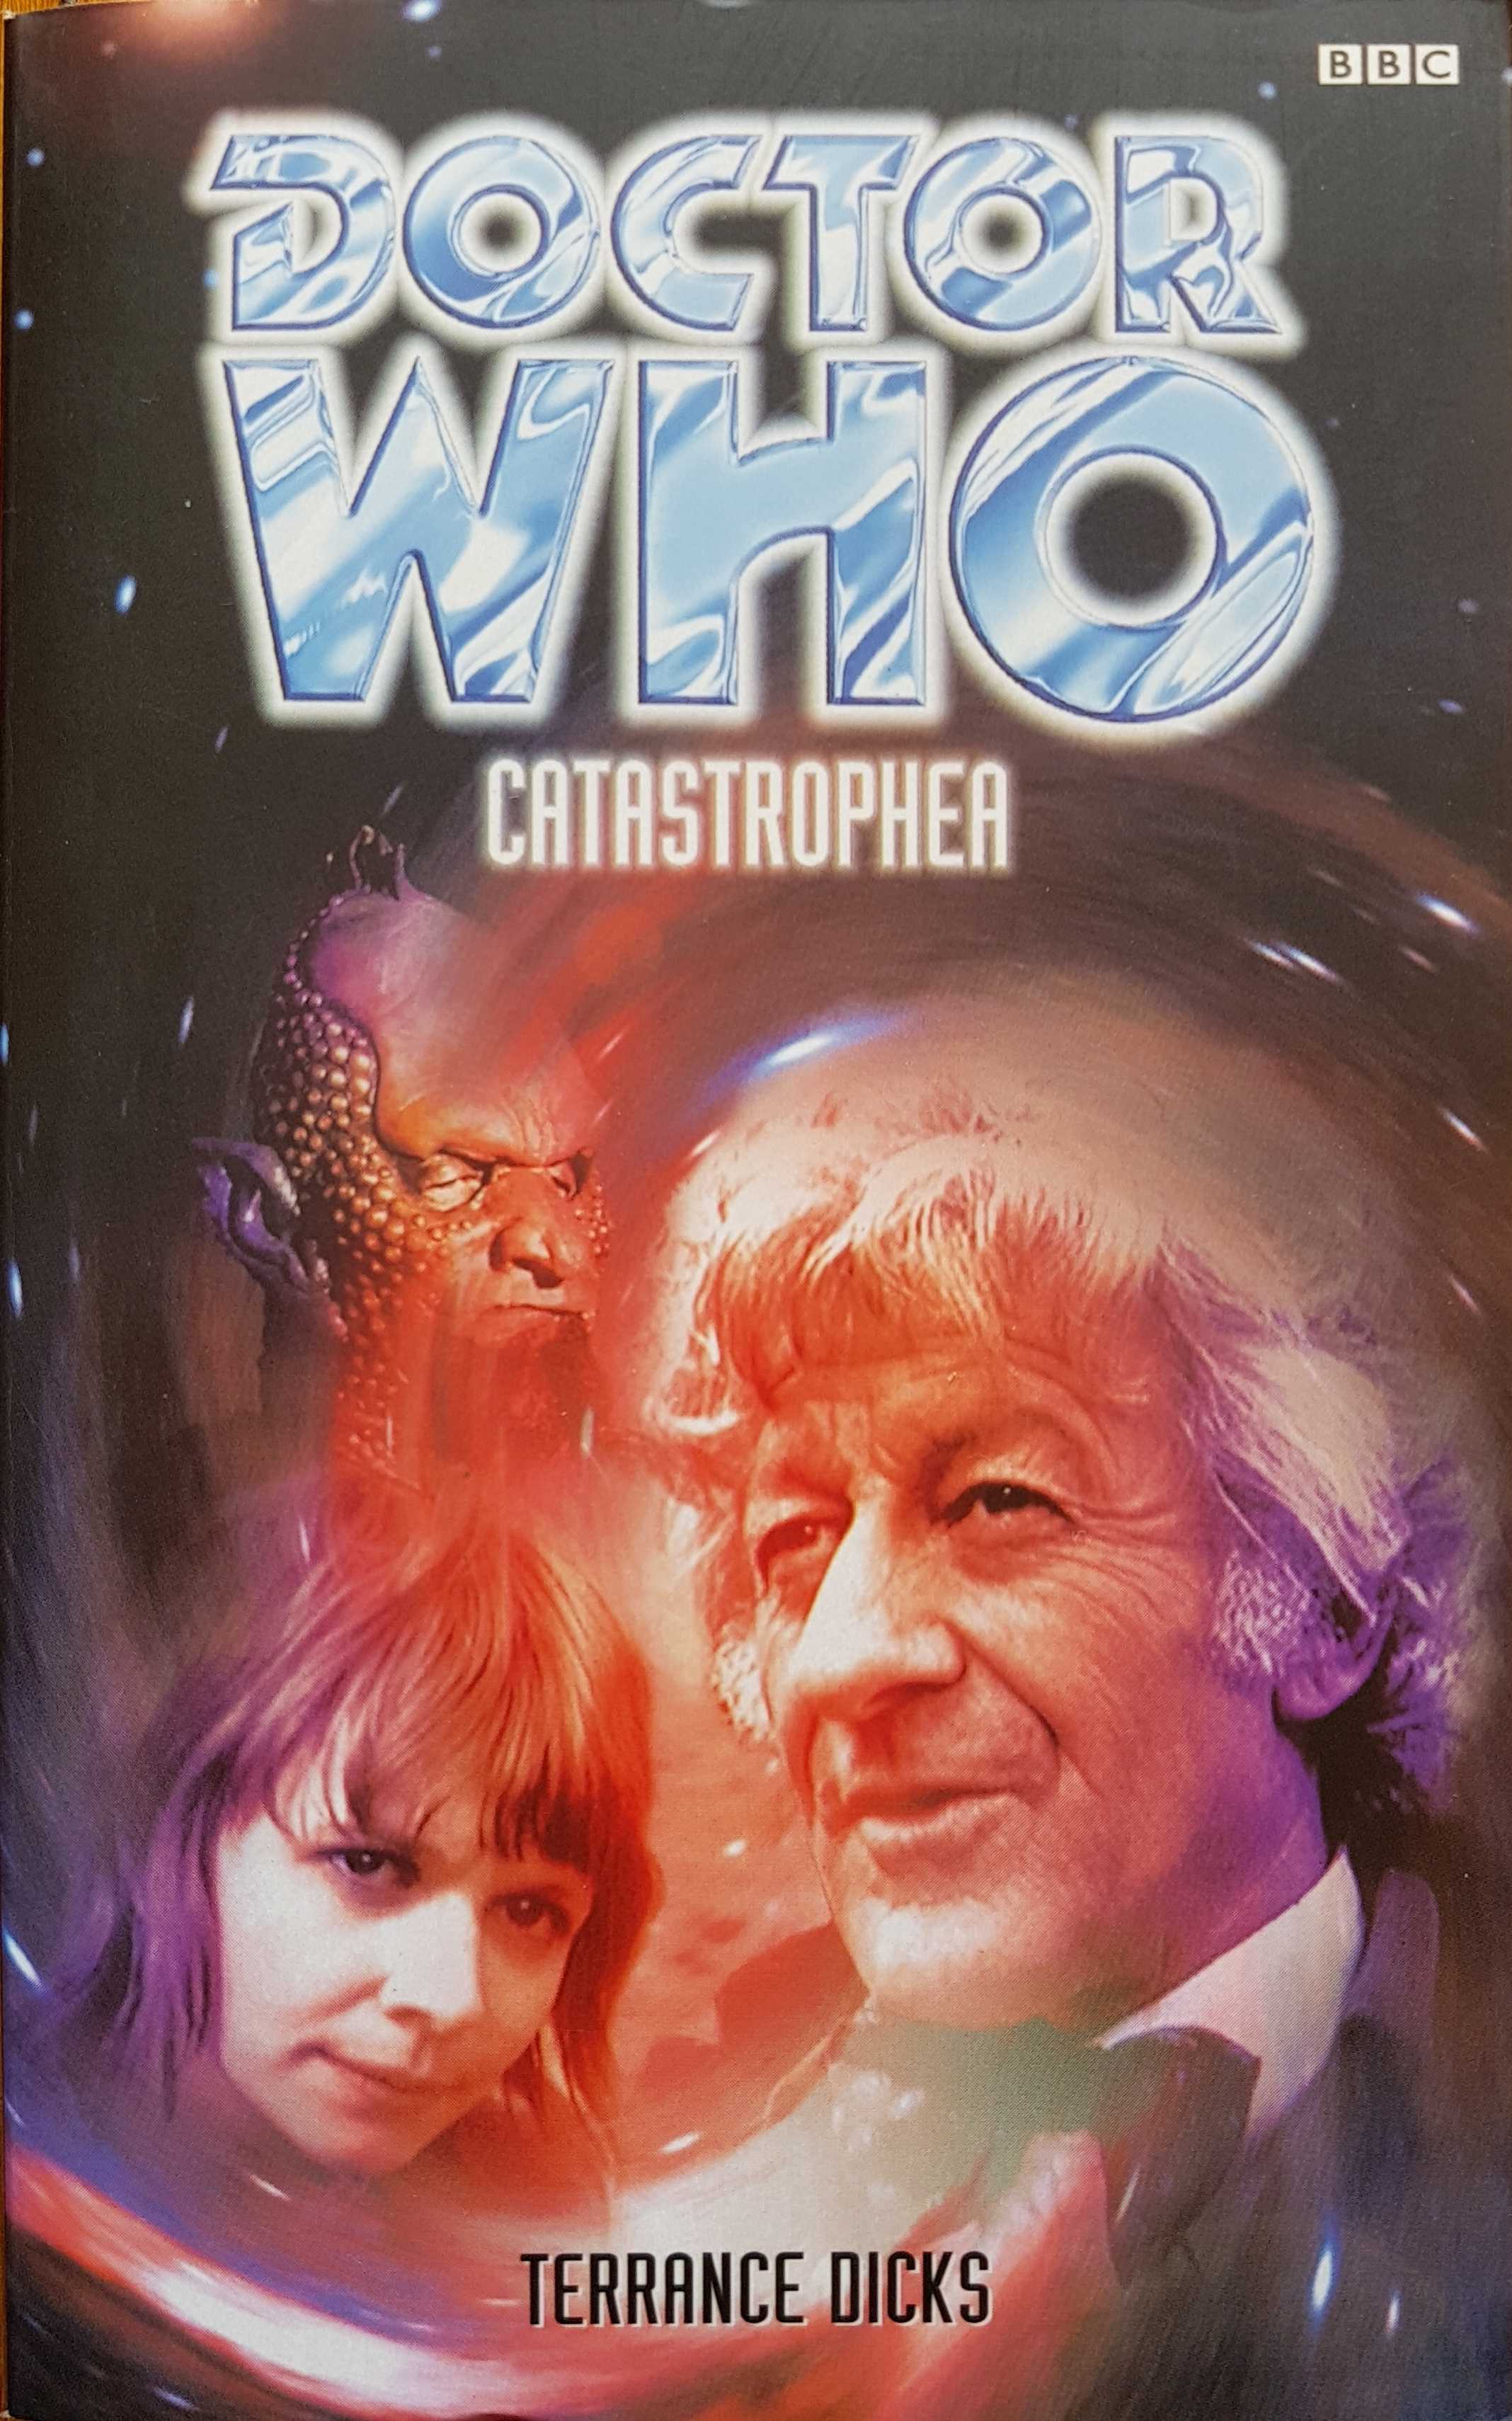 Picture of 0-563-40584-8 Doctor Who - Catastropher (Autographed) by artist Terrance Dicks from the BBC books - Records and Tapes library